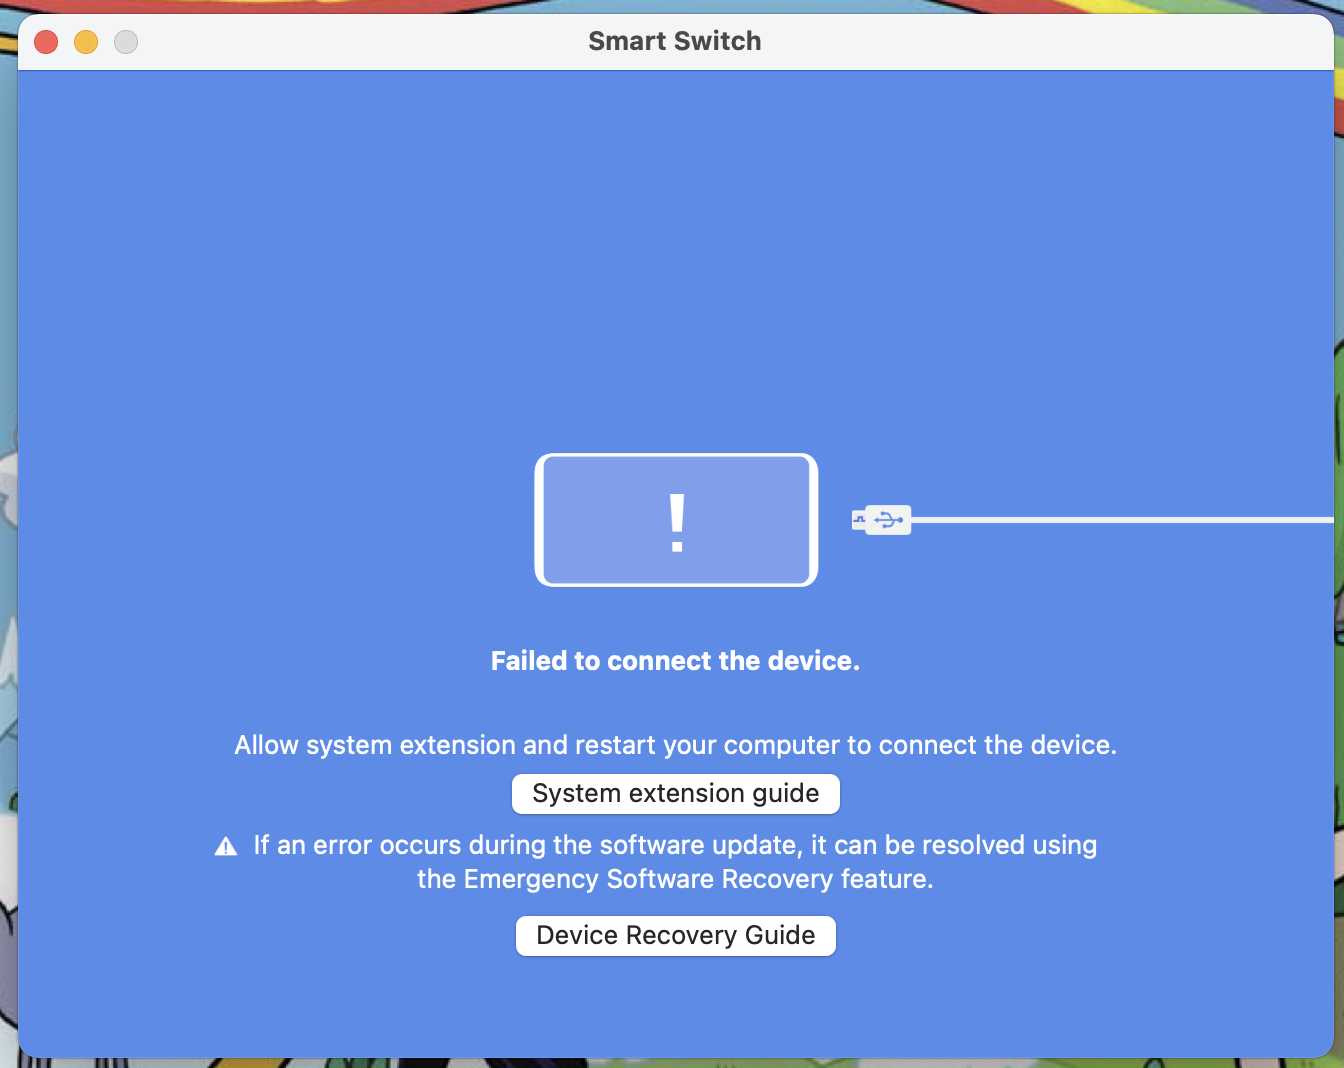 Smart Switch 4.3.1 and OSX Big Sur (11.5.1) not co... - Samsung Members